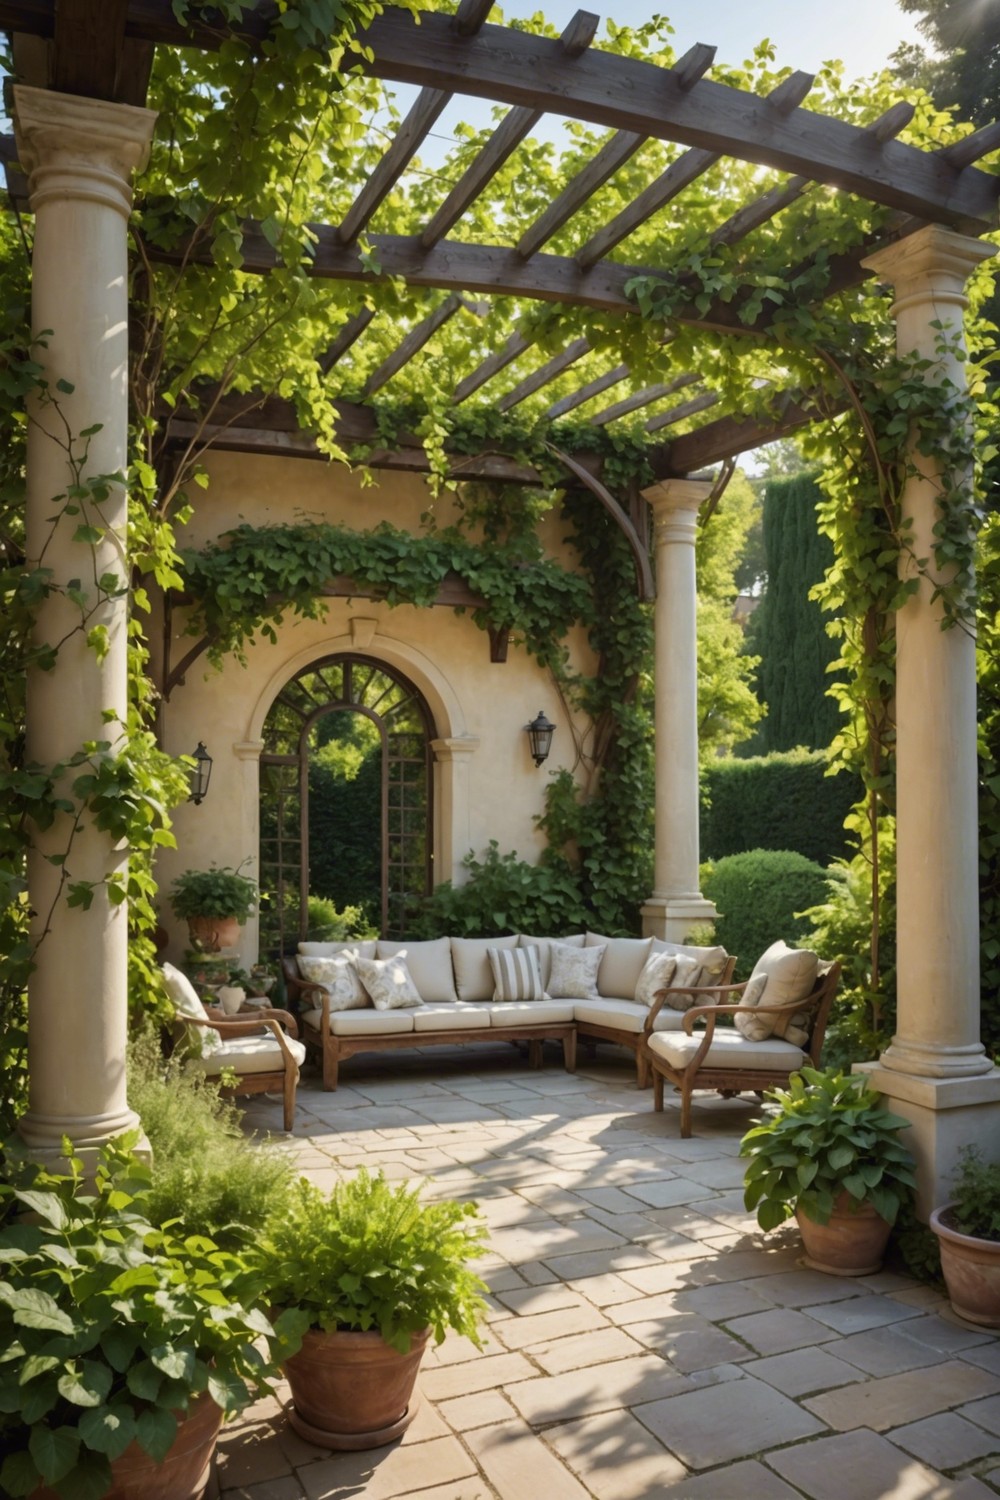 Pergola with Curved Lines